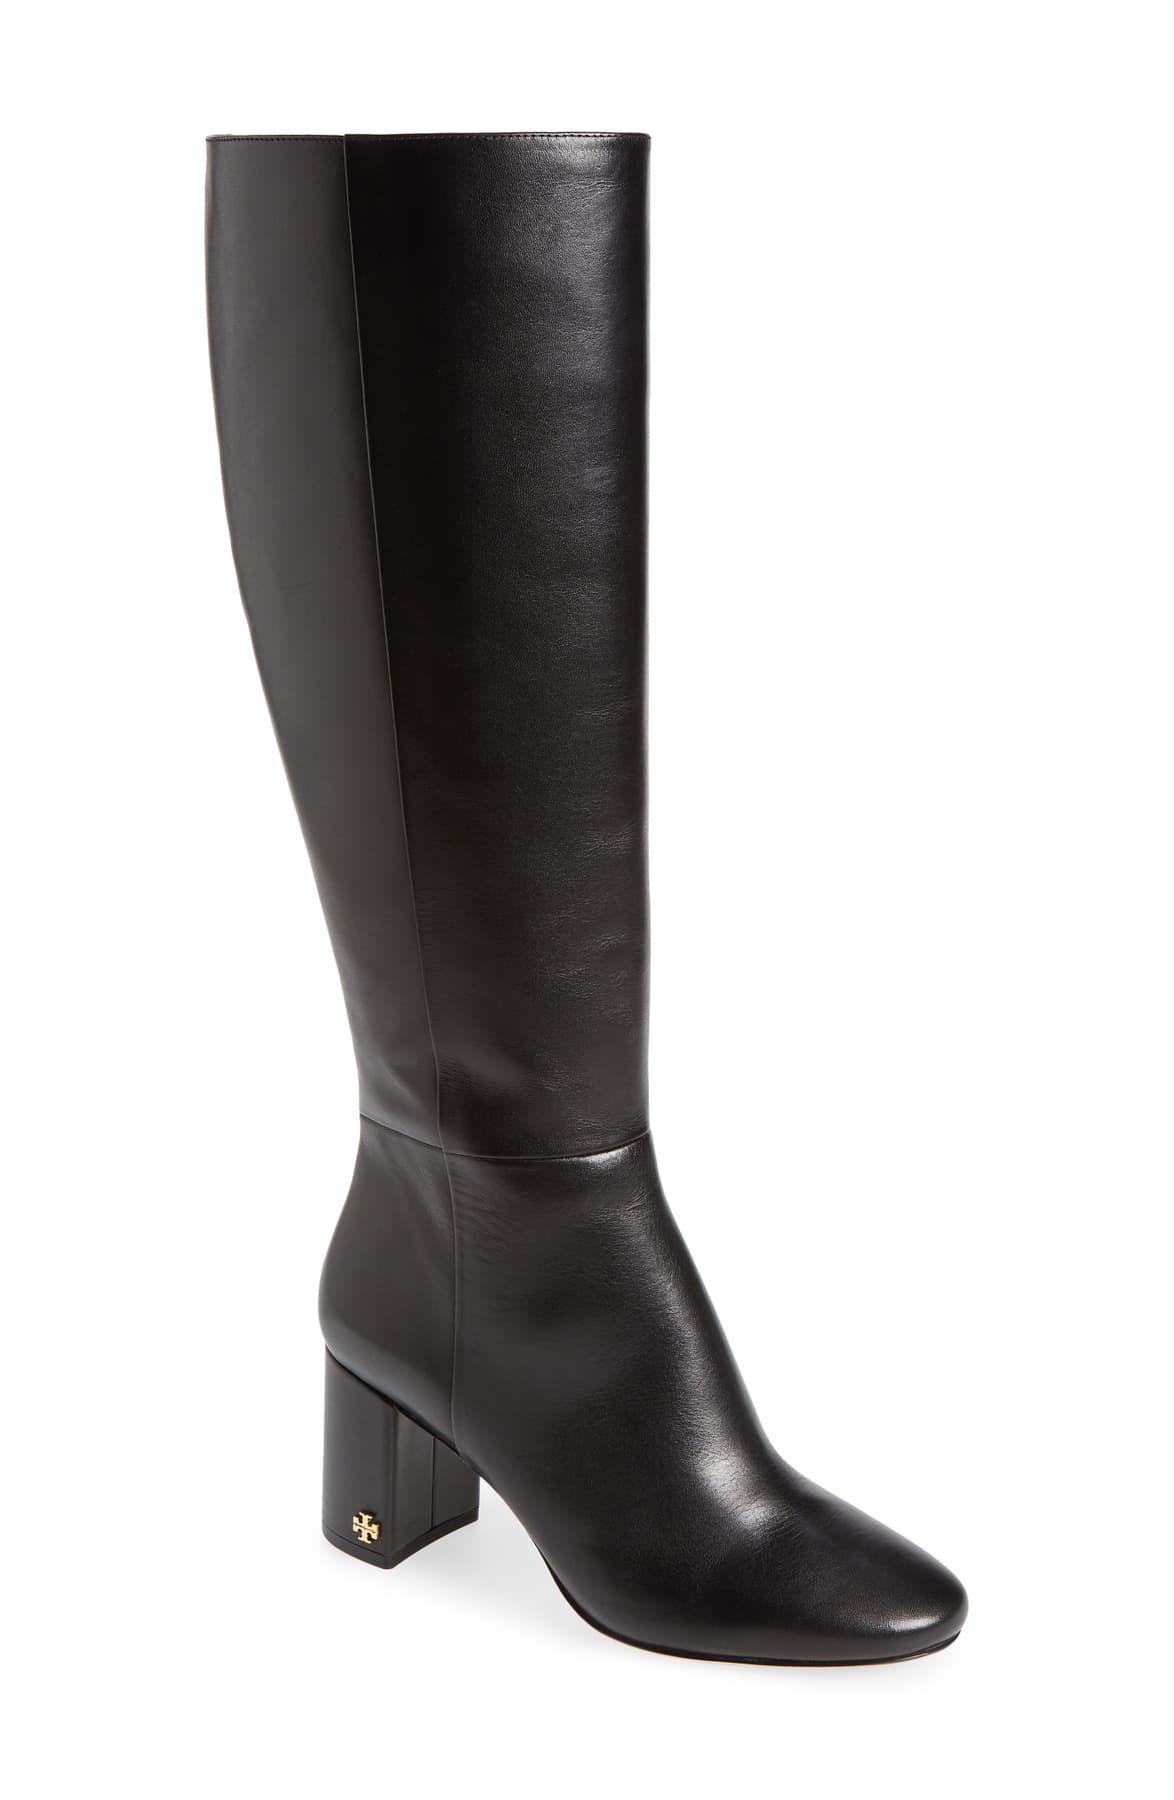 Nordstrom Rack Tory Burch Boots Poland, SAVE 38% 